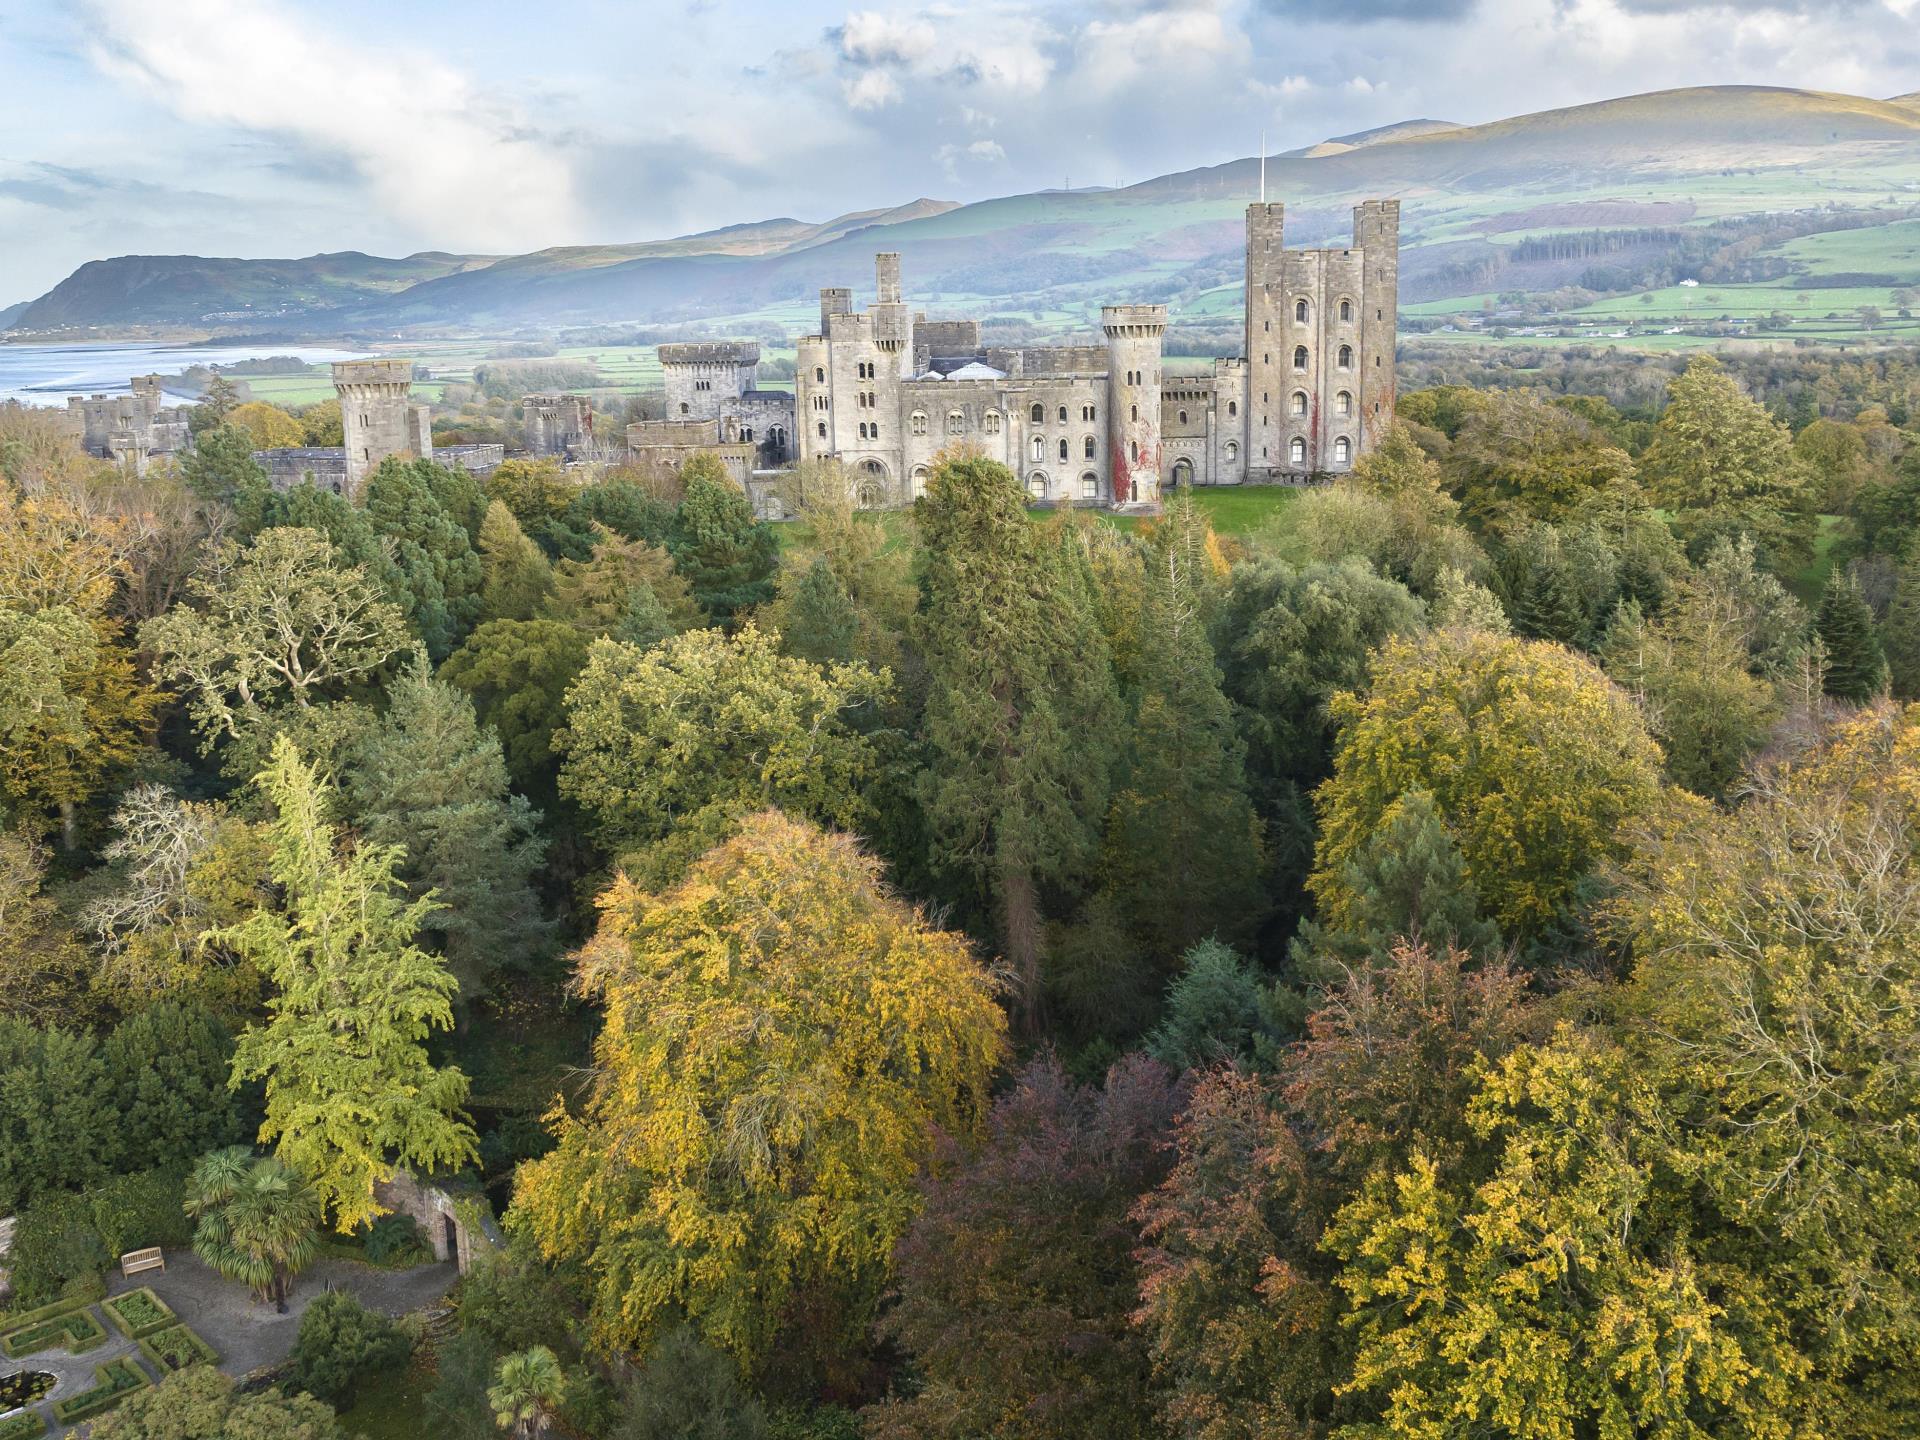 The autumnal trees surround Penrhyn Castle